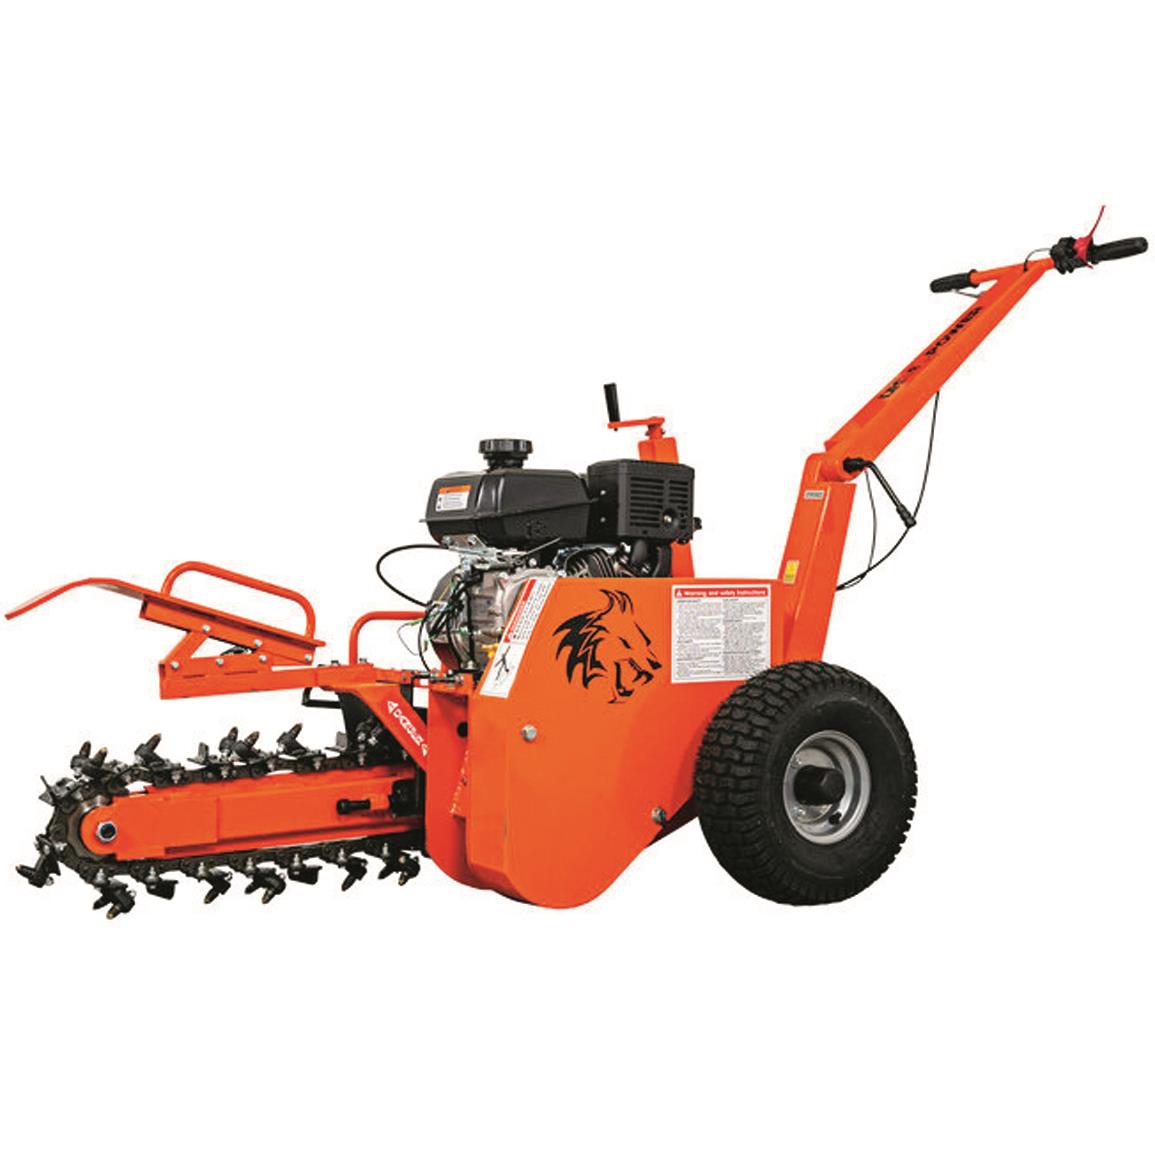 DK2 OPT118 18" Direct Drive Trencher with KOHLER 7 HP CH270 Engine